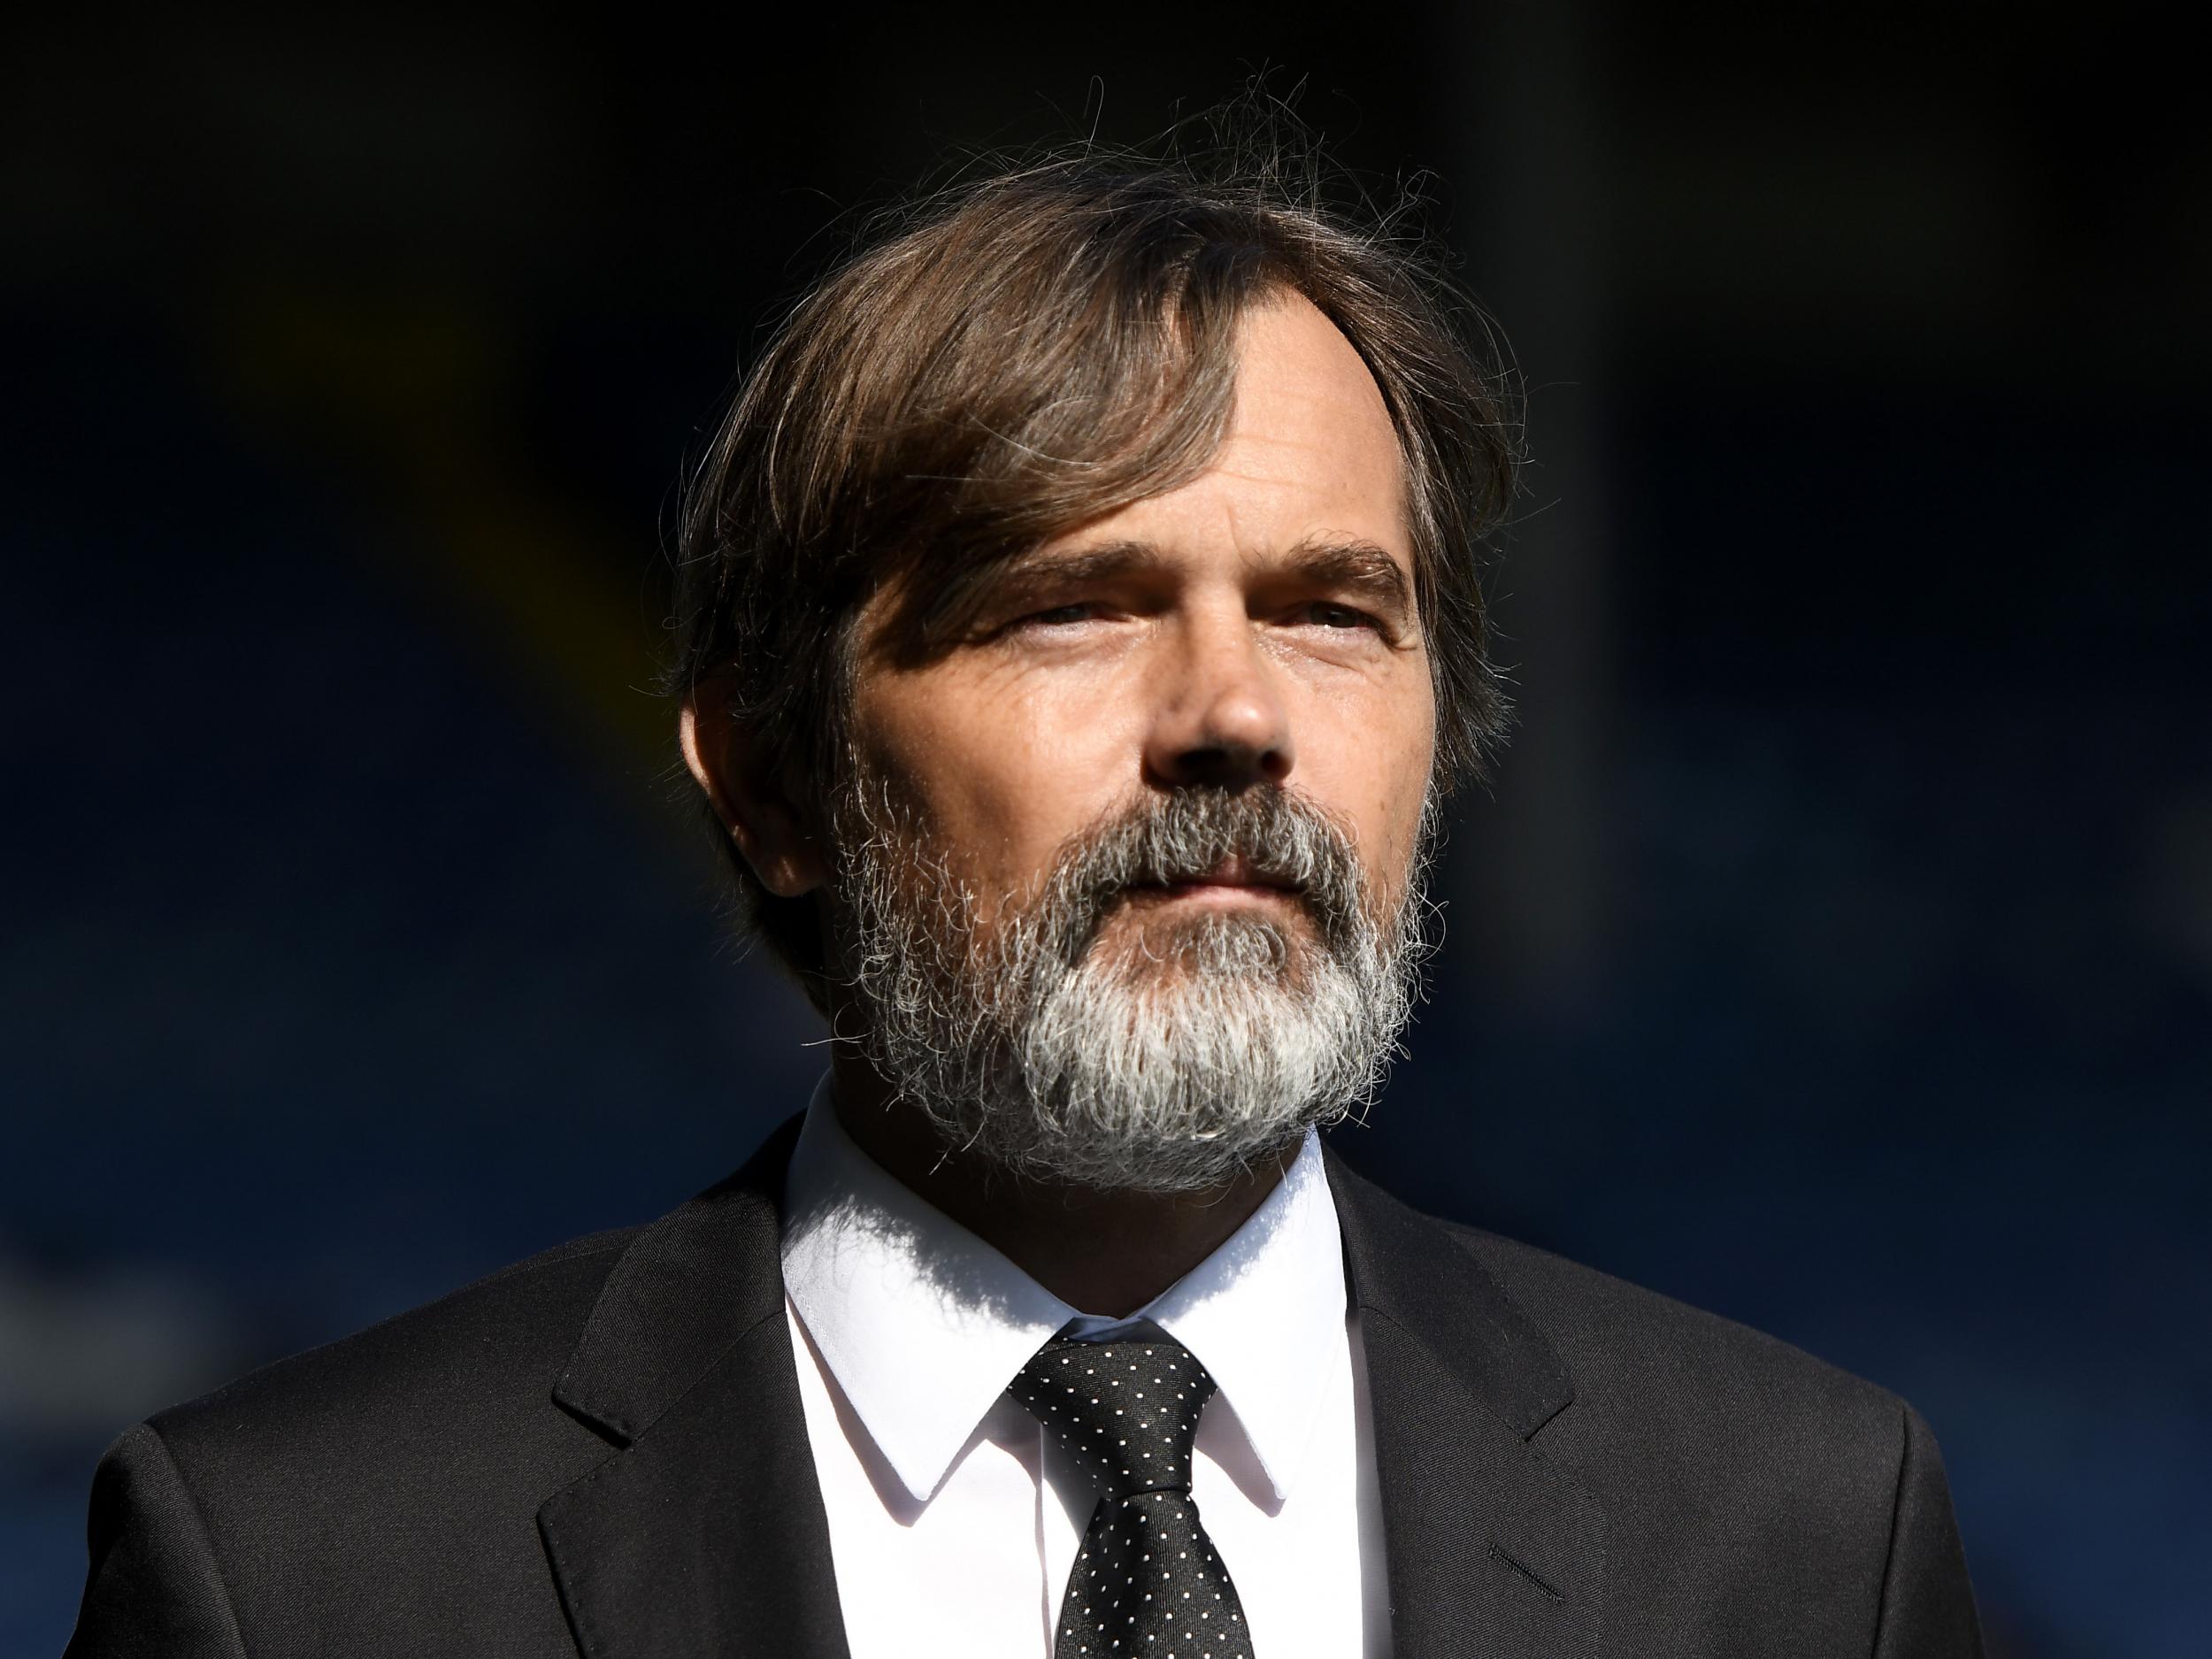 Phillip Cocu has stepped down as Derby manager